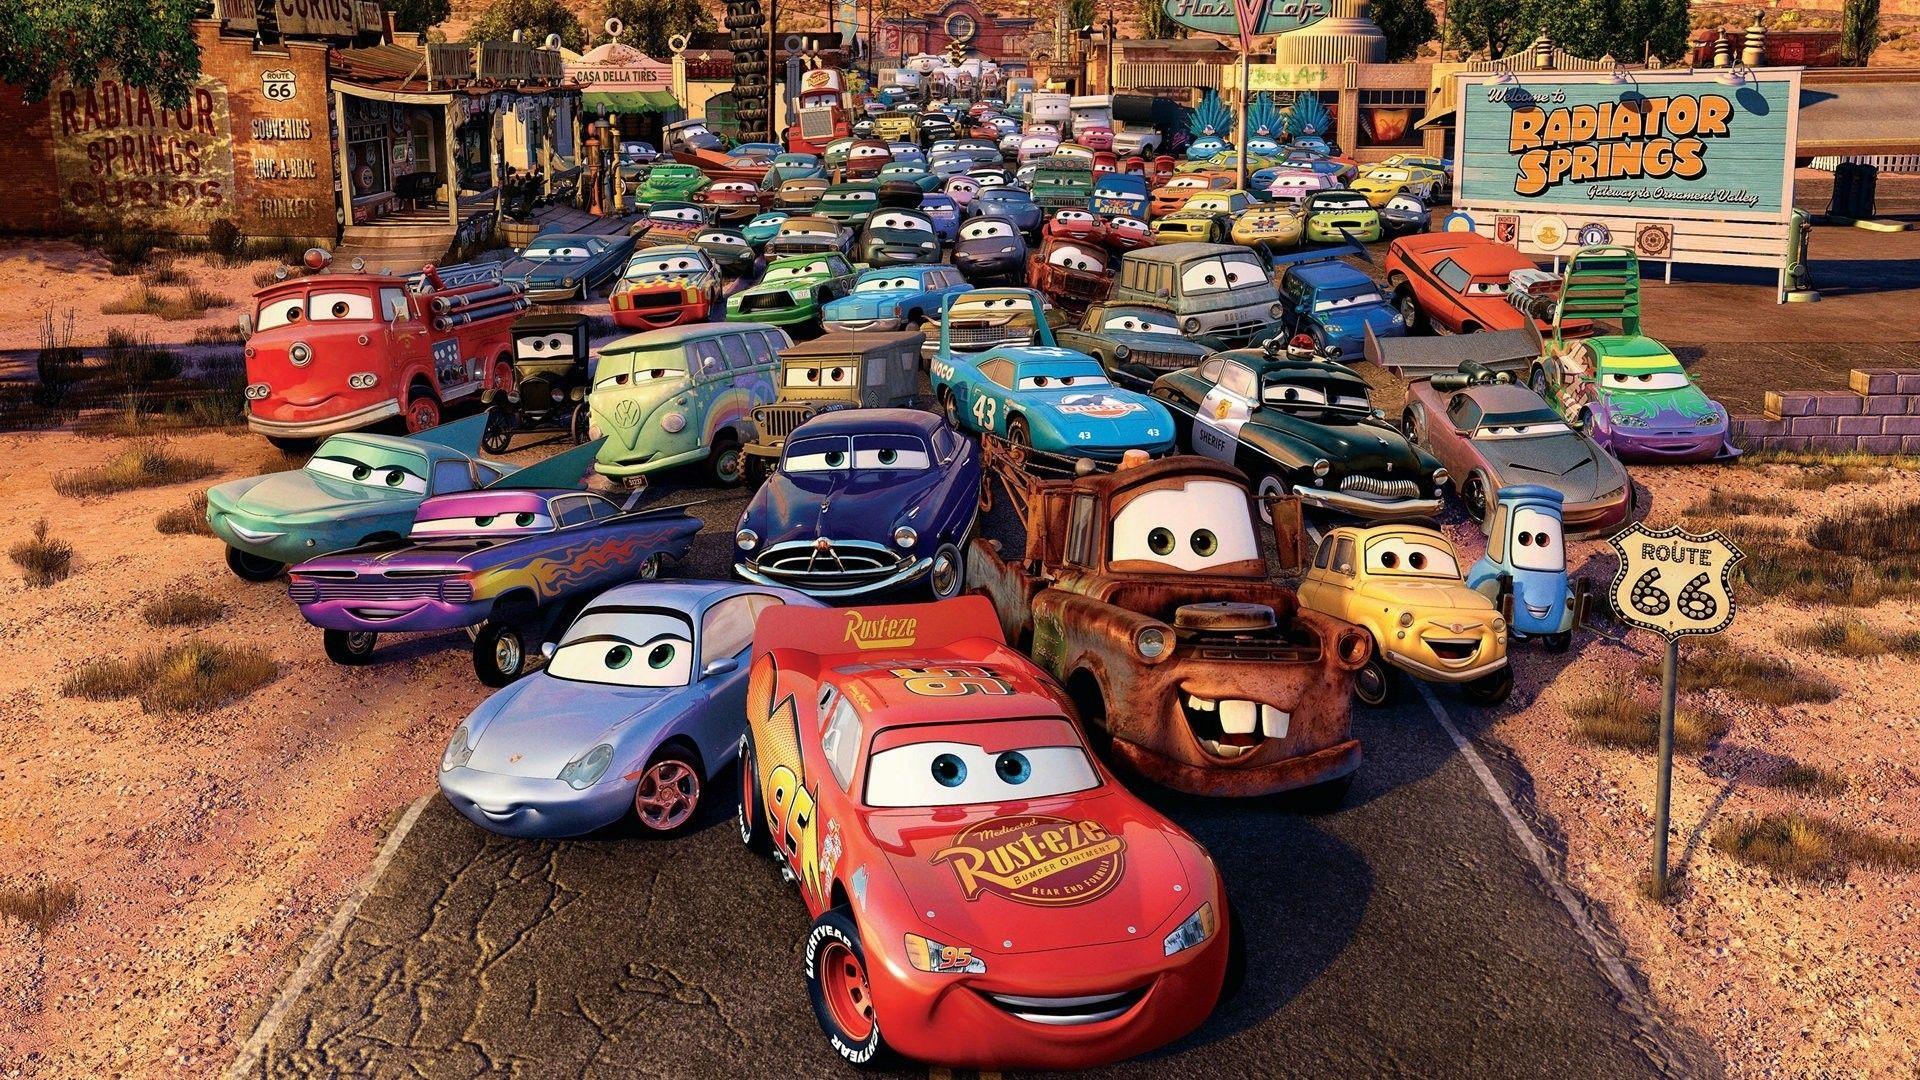 Download the Cars 2 Characters Wallpaper, Cars 2 Characters iPhone